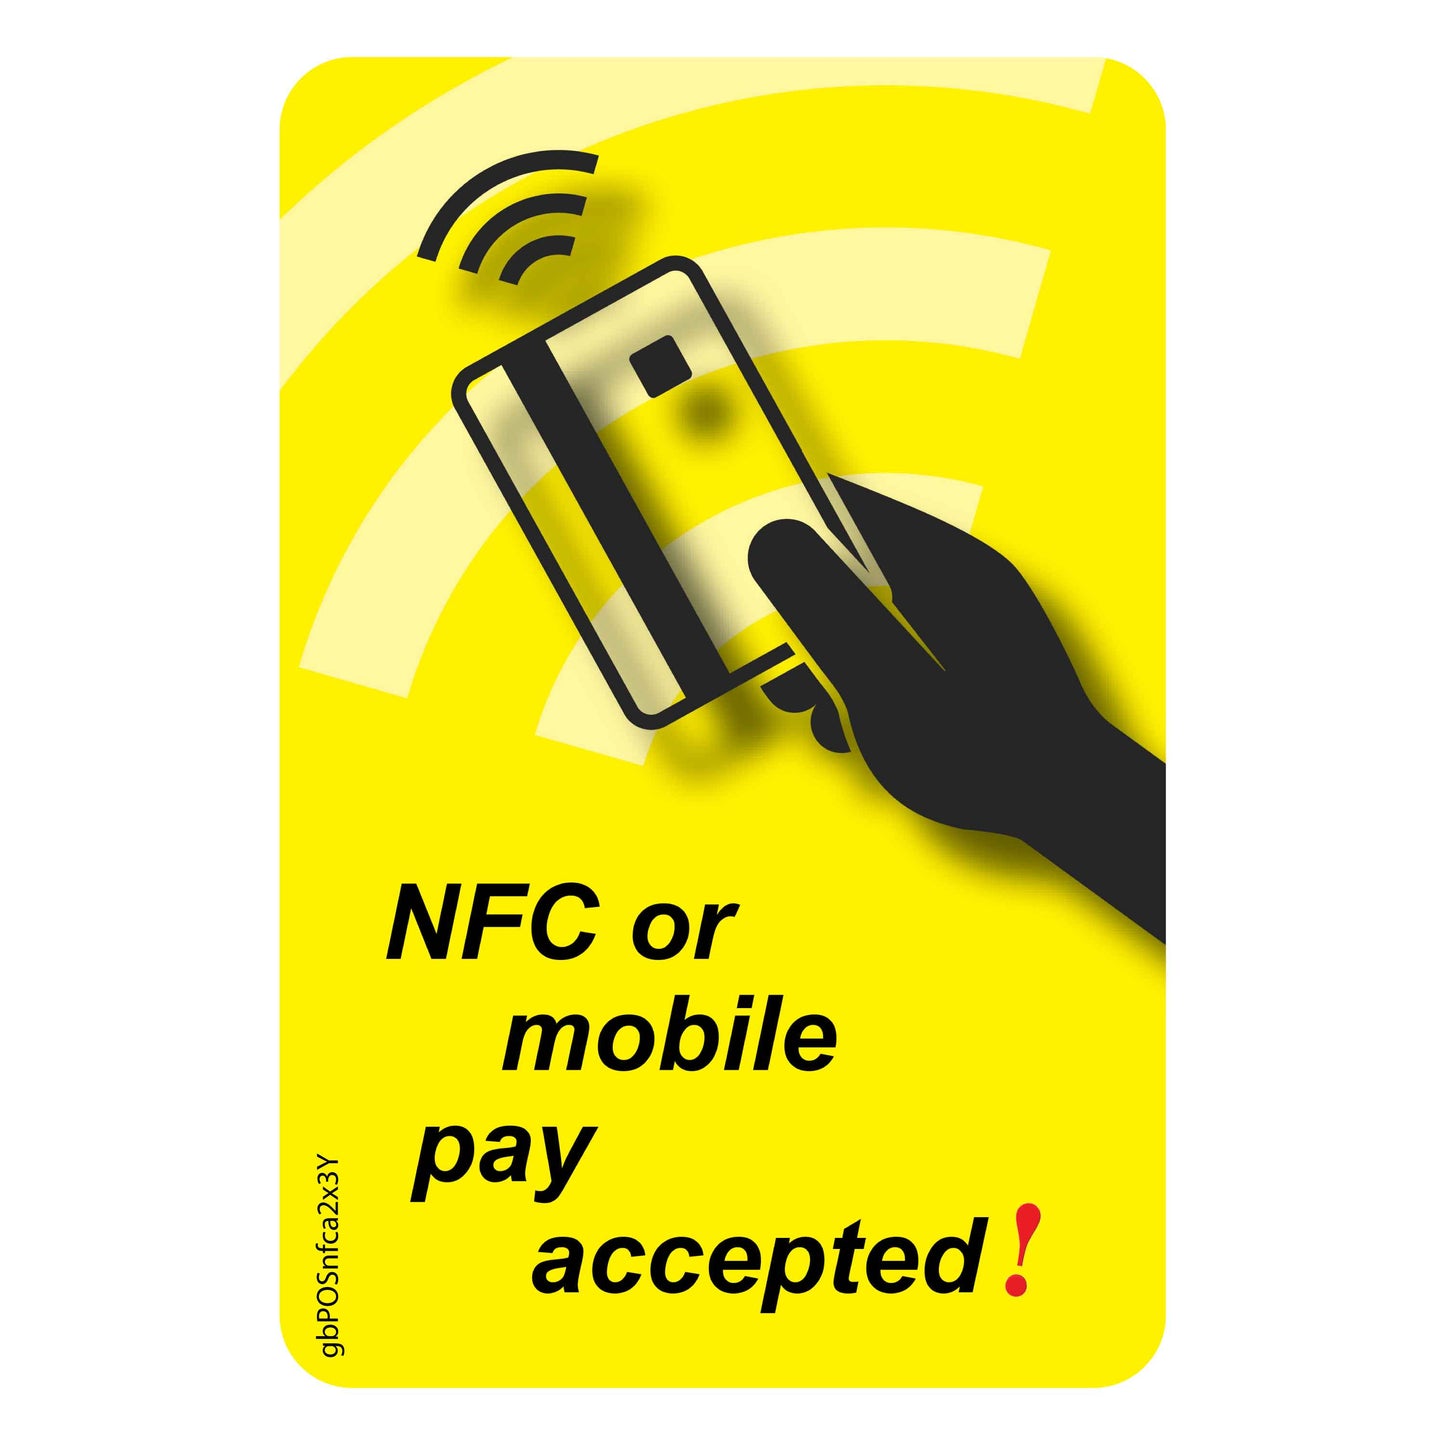 NFC or Mobile Pay Accepted Decal, Yellow. 2 inches by 3 inches in size. 